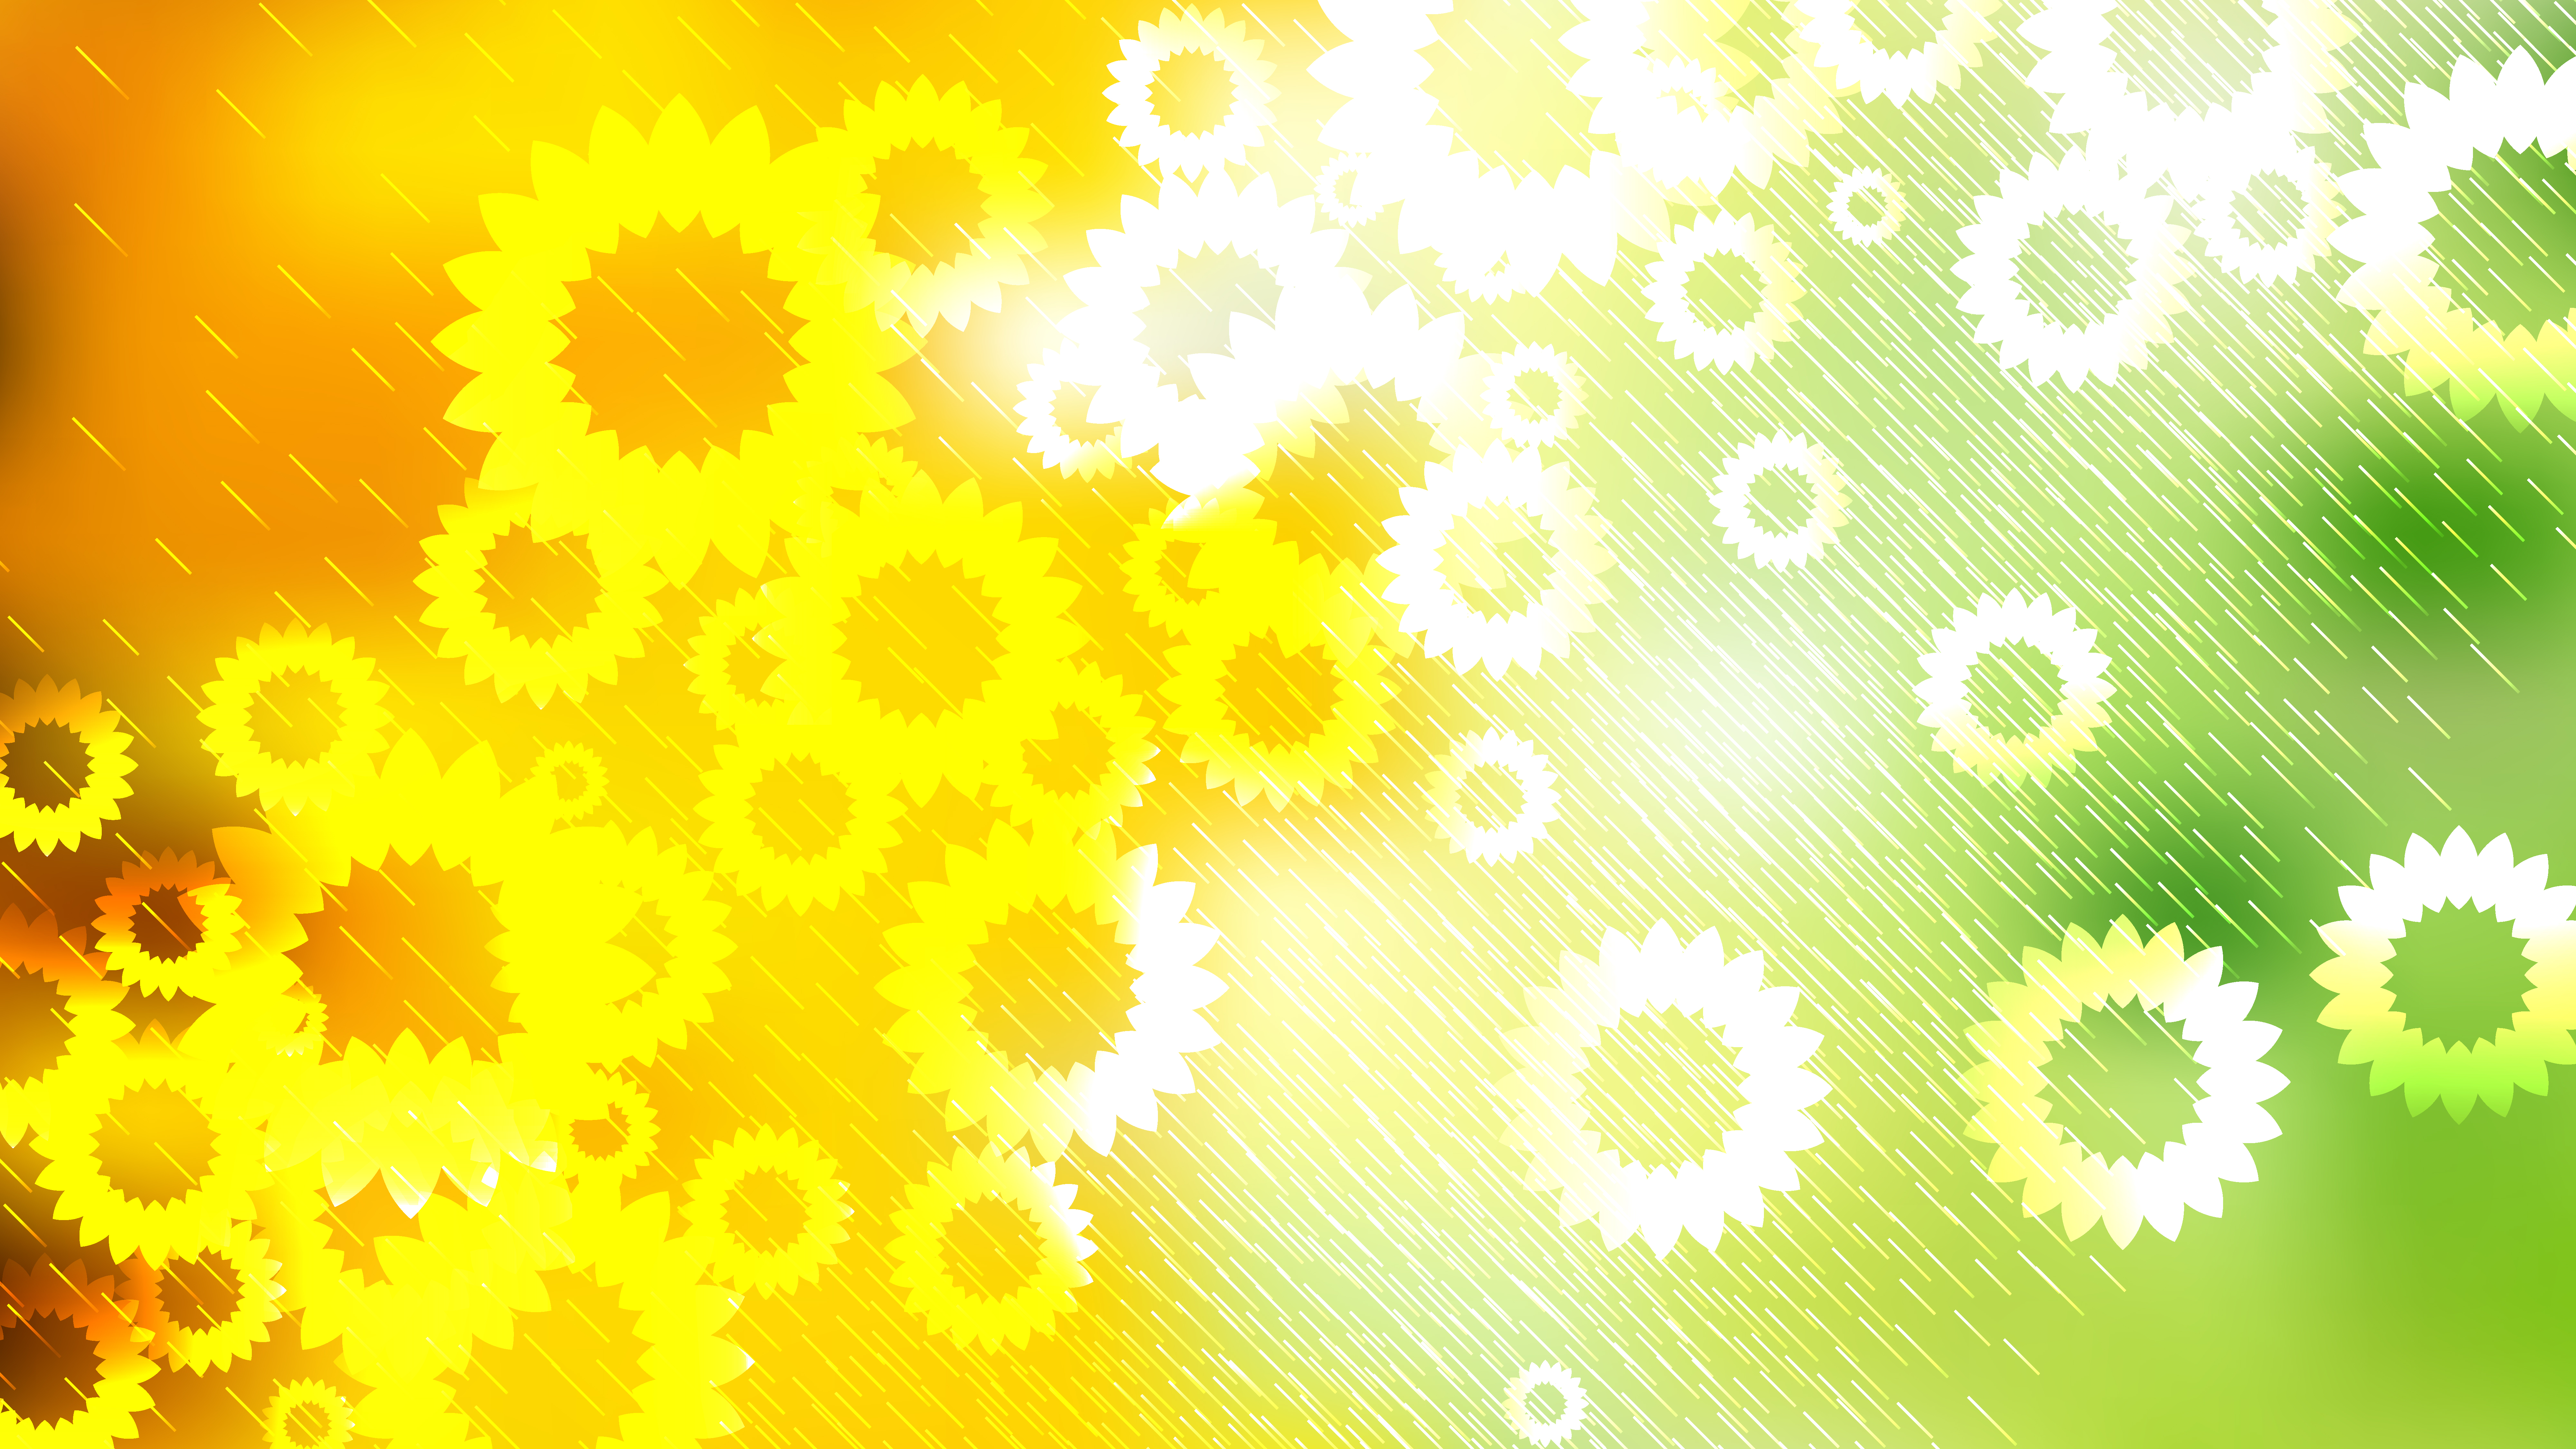 Green Yellow And White Flowers Background Image